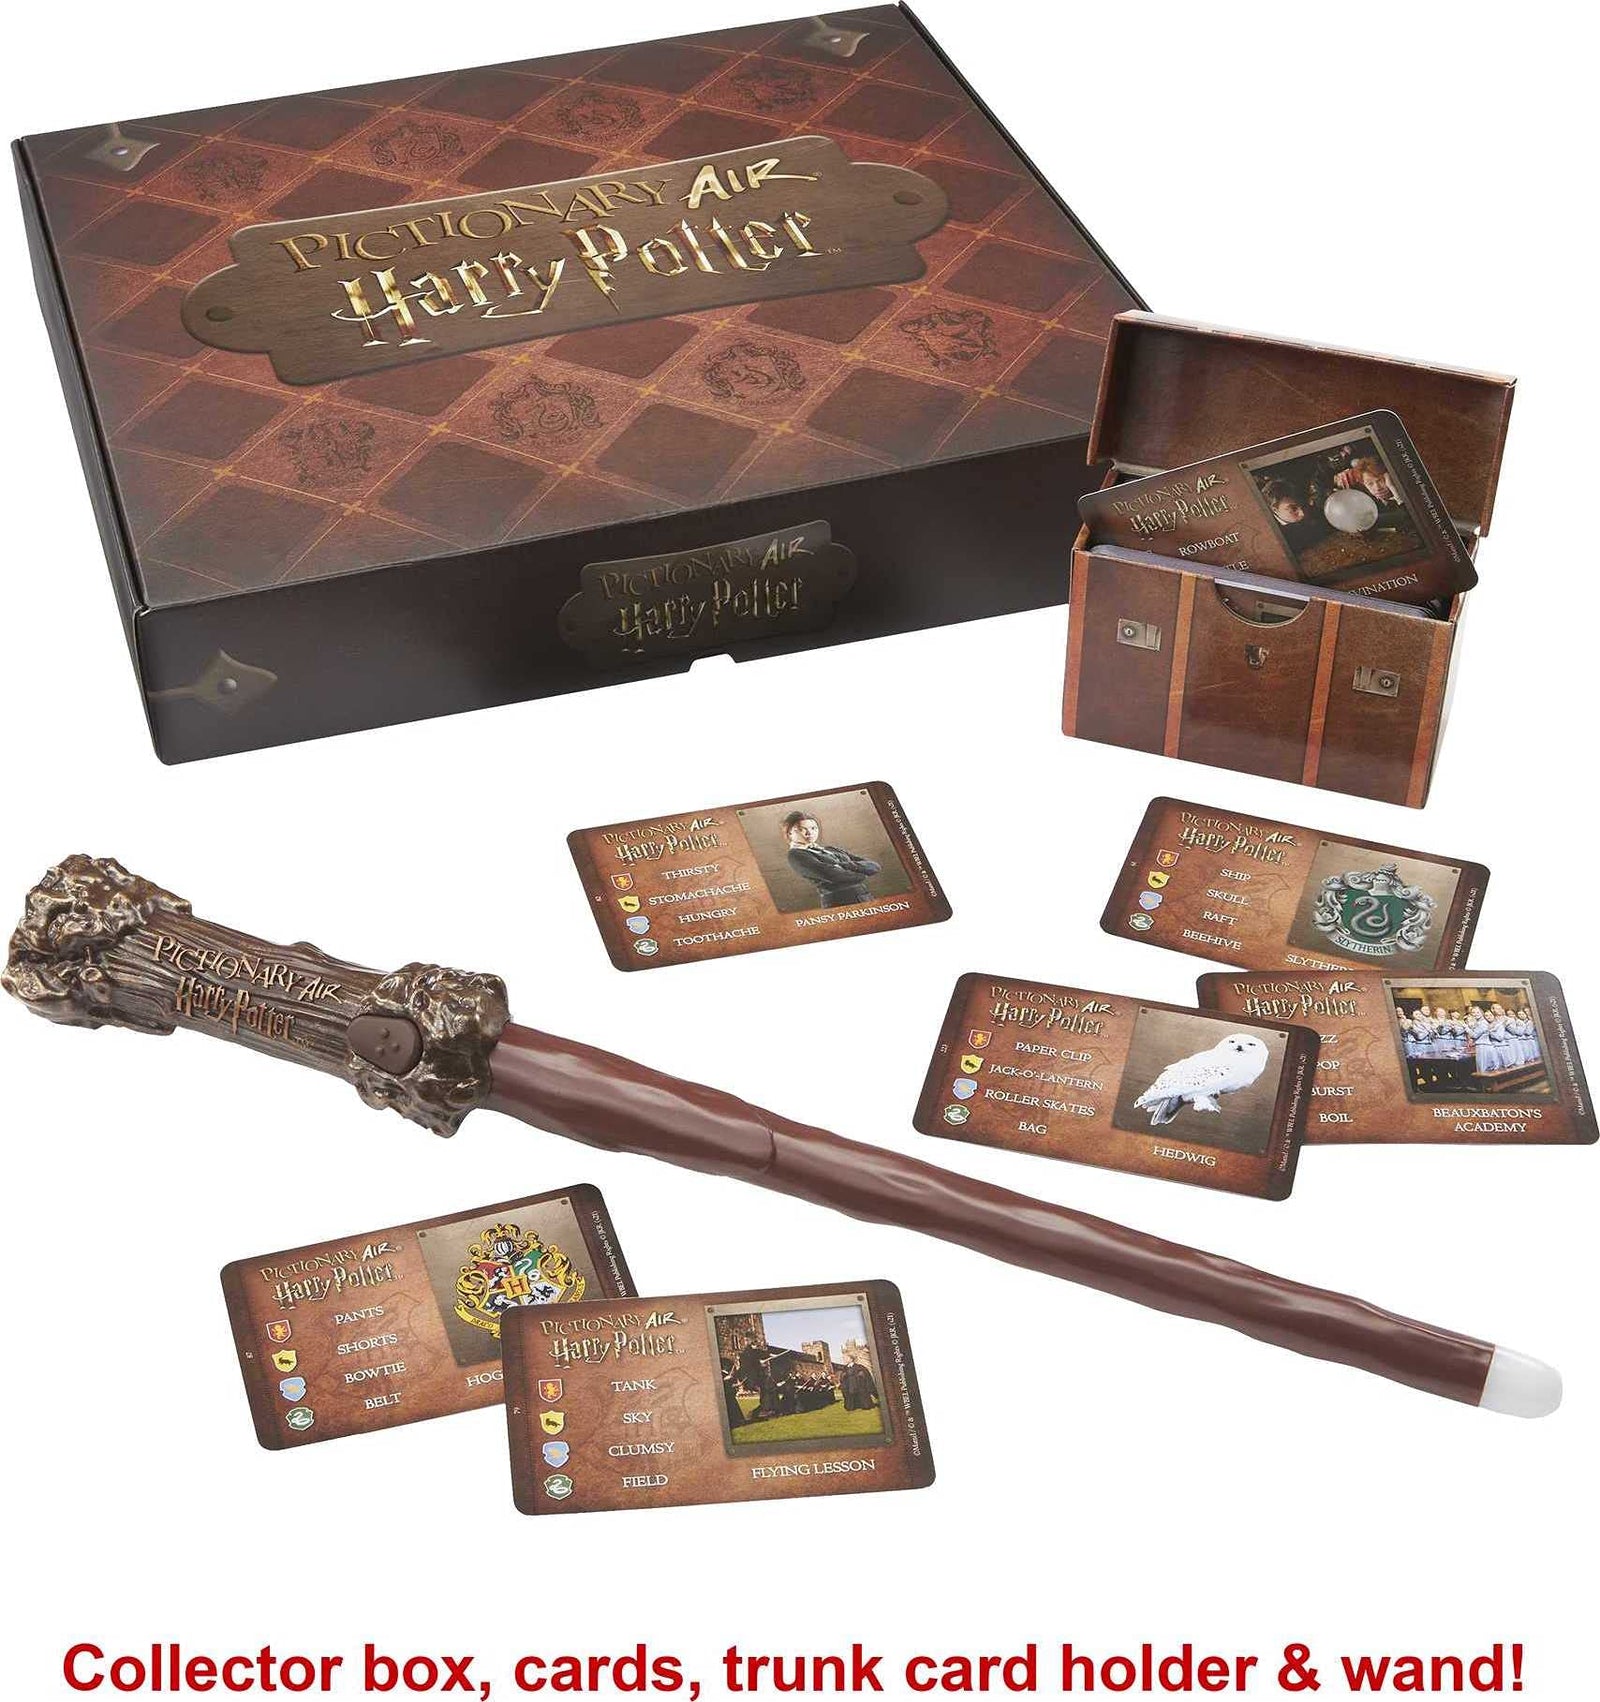 Pictionary Air Harry Potter Family Drawing Game, Wand Pen, 112 Double-Sided Clue Cards with Picture Bonus Clues, Trunk Card Holder, Collector Package. Gift for for 8 Year Olds & Up